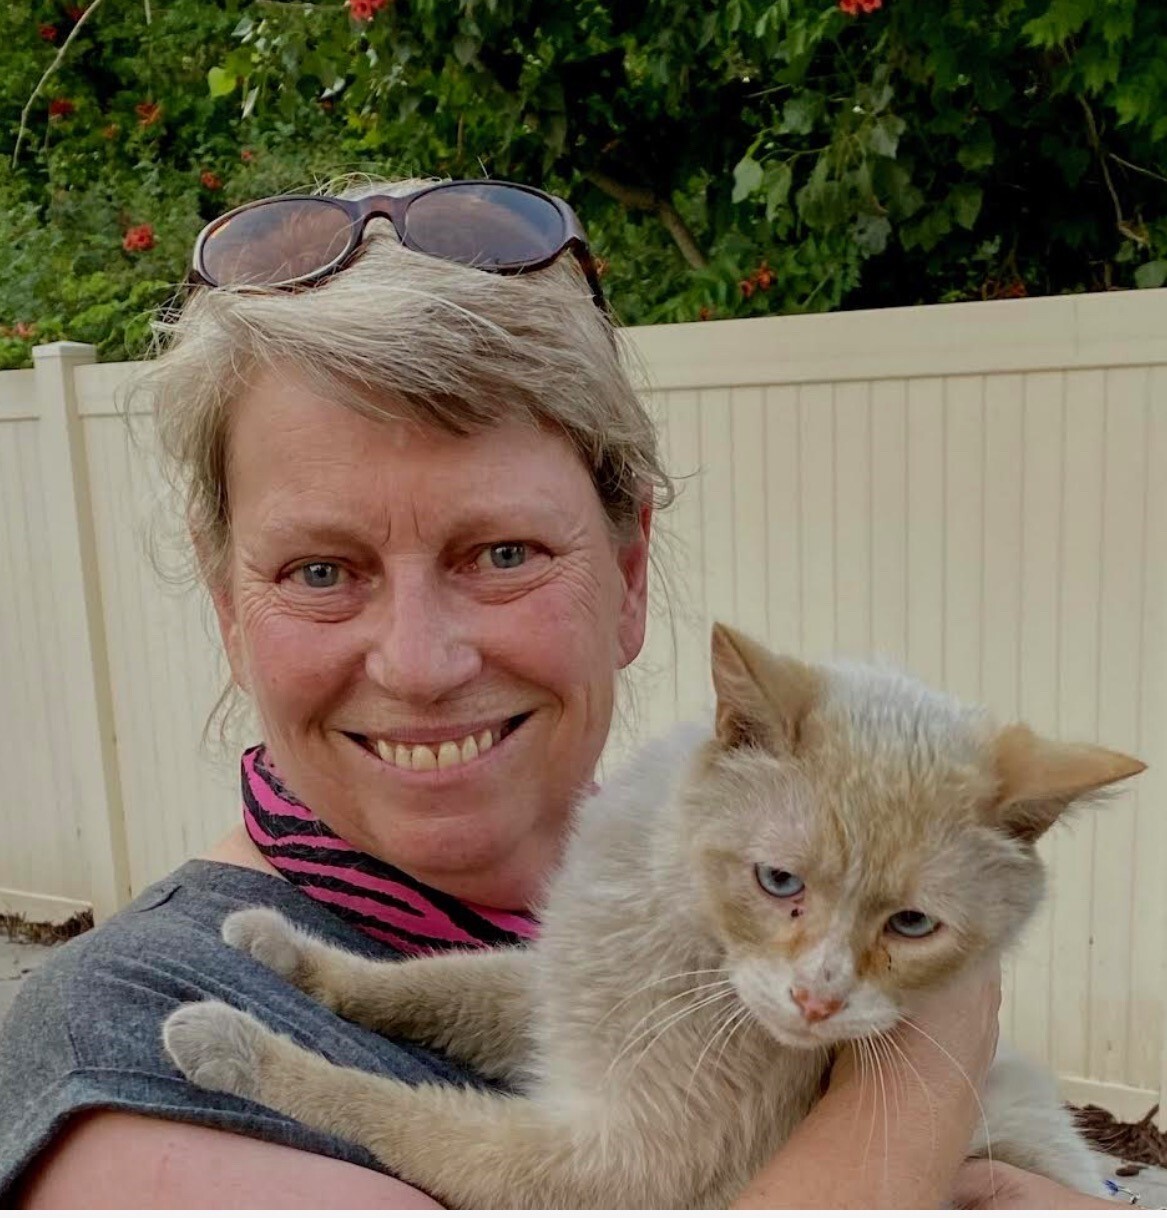 Julie Davis, Board President, looks to the camera from the center of the screen. She holds a dusty grey cat in her arms, with front paws on her shoulder. The pair are in front of a white fence and trees.